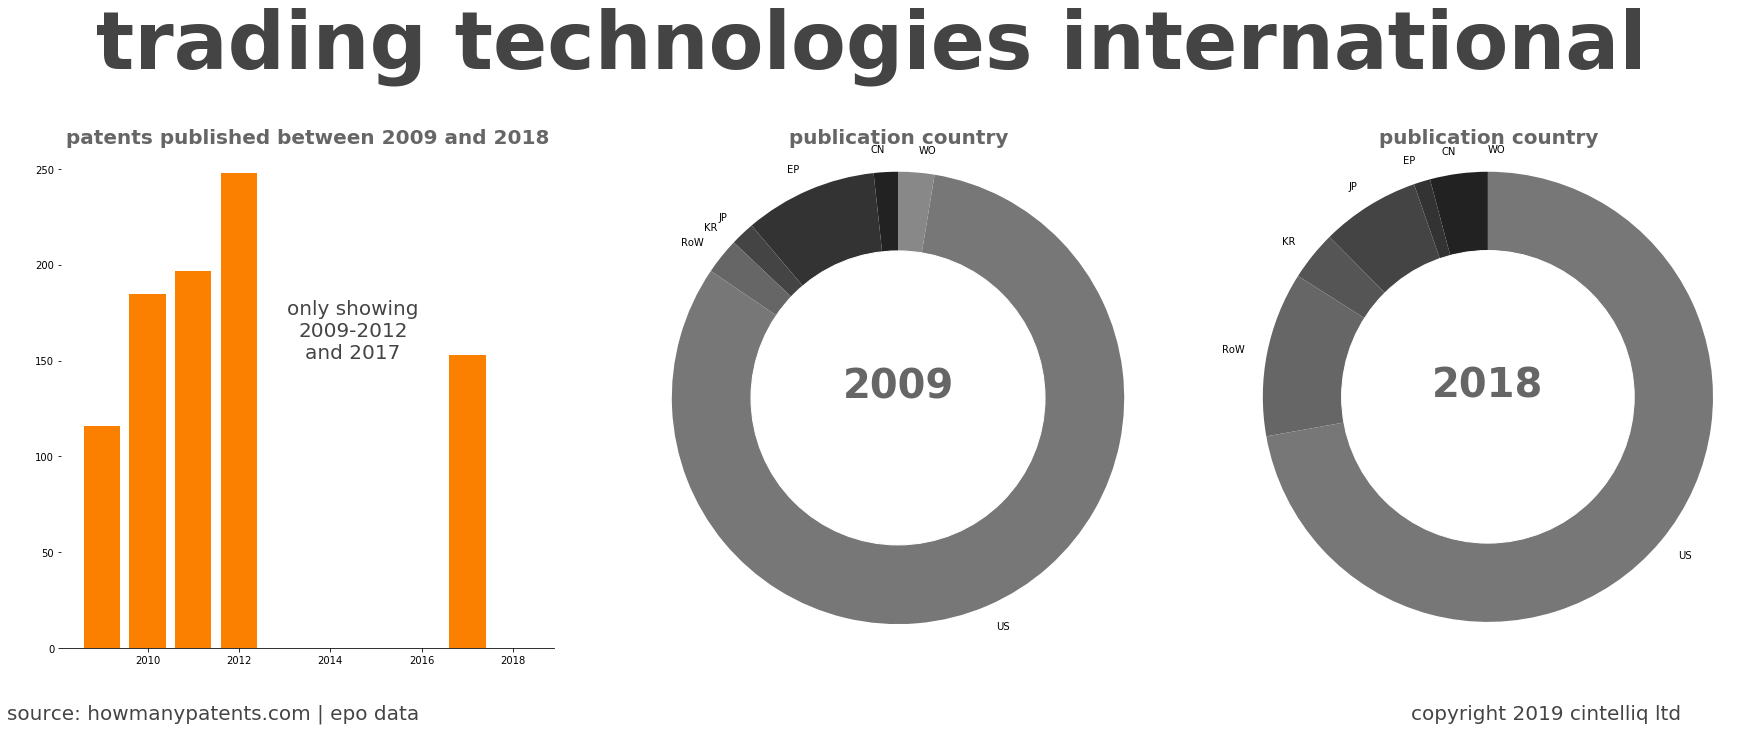 summary of patents for Trading Technologies International